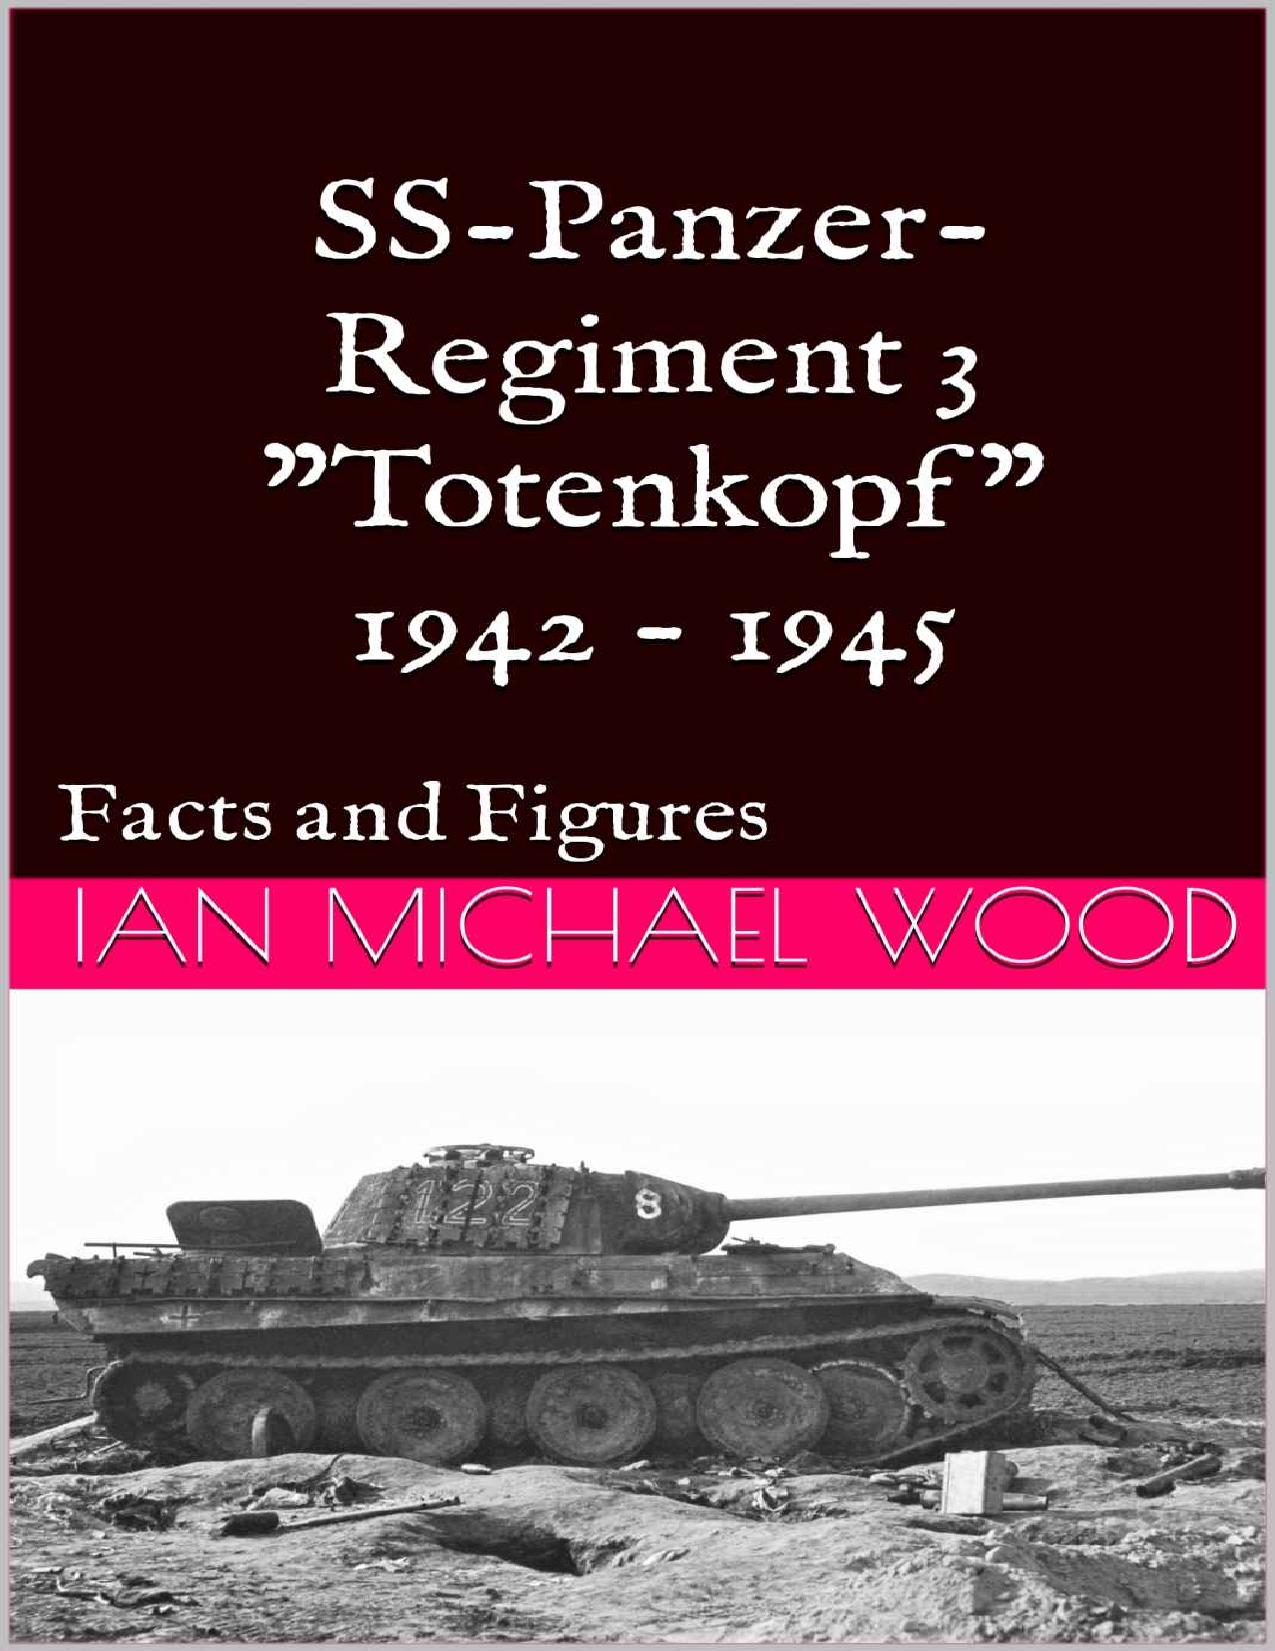 (eBook PDF)S-Panzer-Regiment 3: Facts and Figures by Ian Michael Wood